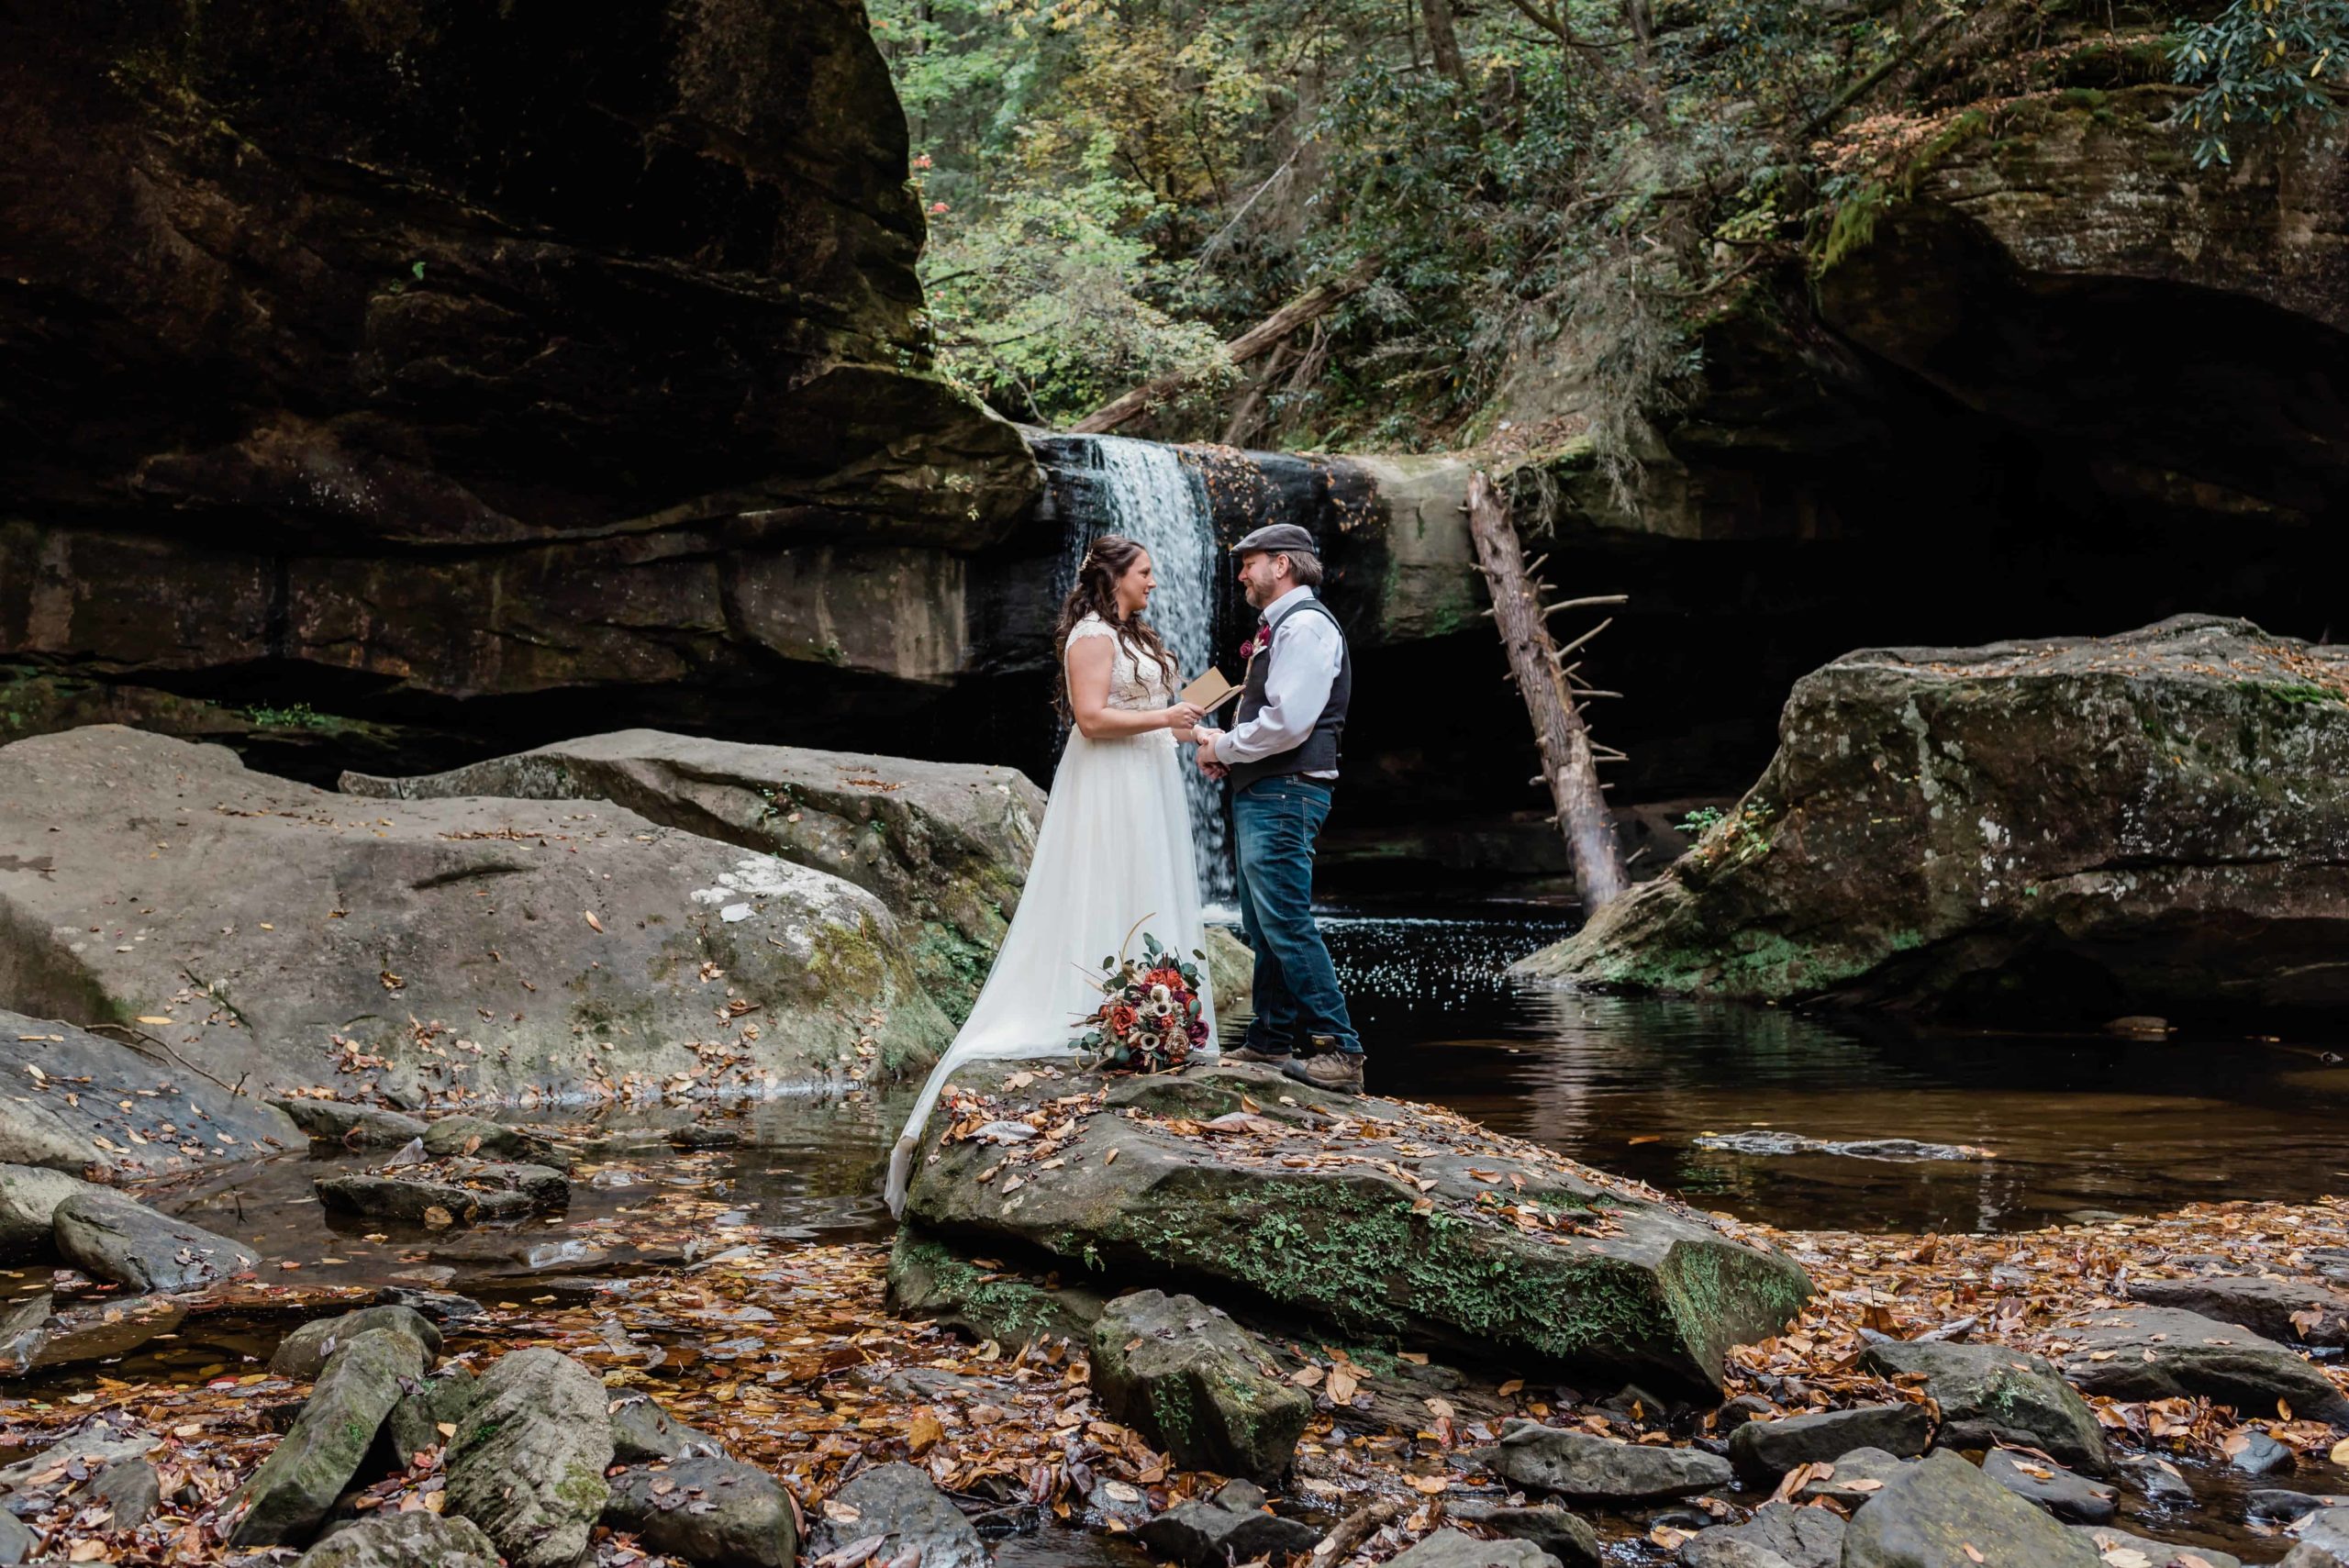 in a Kentucky adventure elopement a couple in wedding attire stands on a rock with a water fall behind them The elopement is in a very large natural ampitheatre surrounding them. The bride reads her vows to the groom during this Kentucky hiking elopement surround by rushing water and lush forests and towering rock walls.